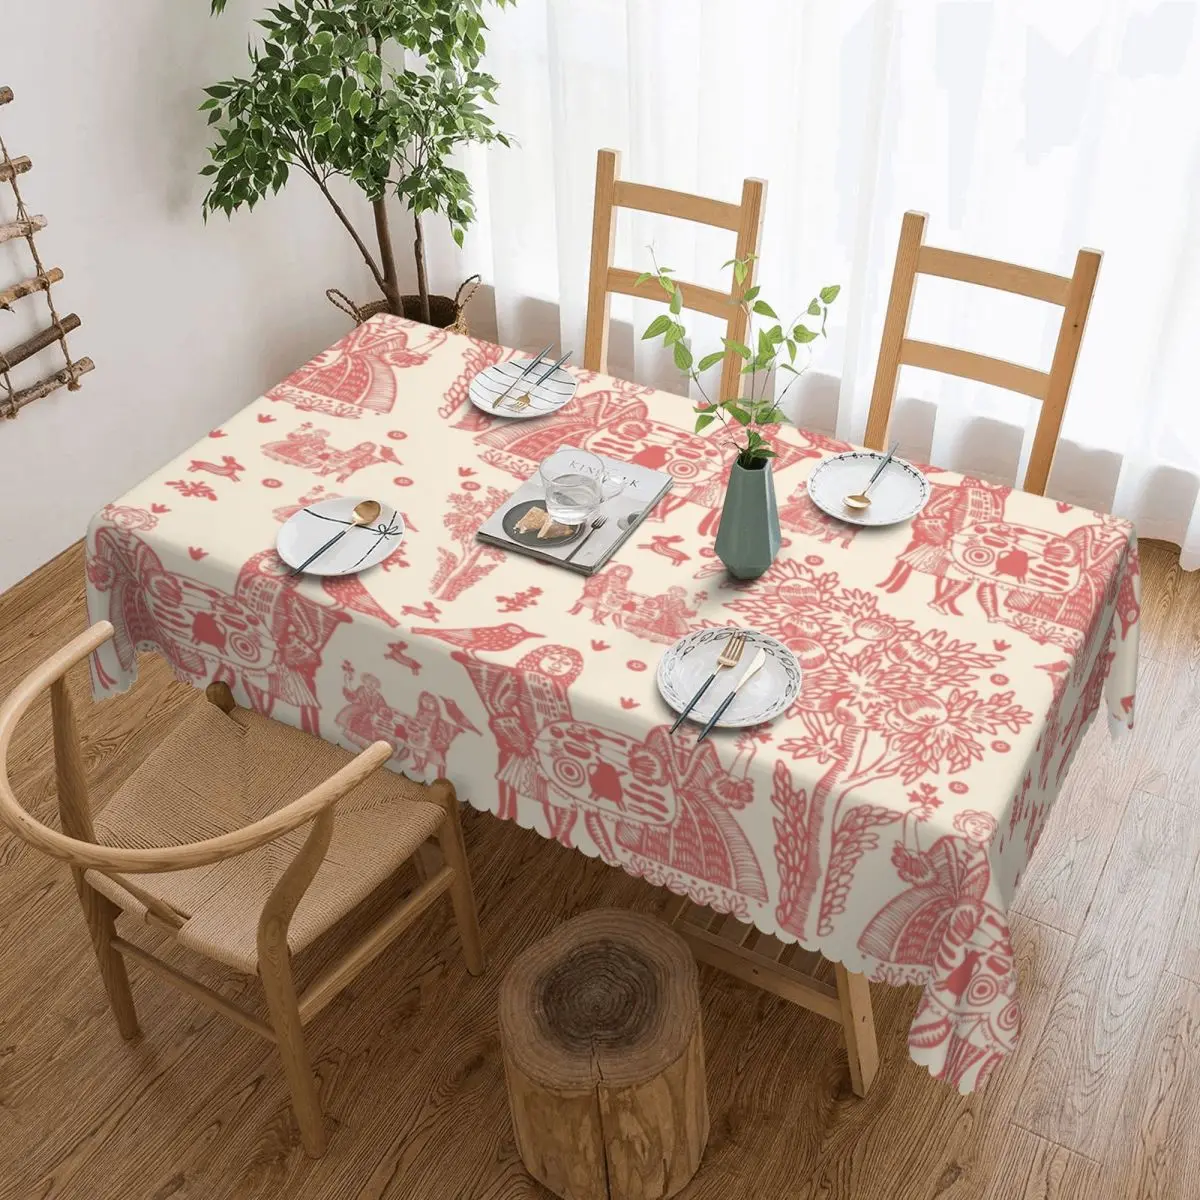 

Rectangular Waterproof Toile De Jouy French Motif Table Cover Flora Table Cloth Tablecloth for Dining